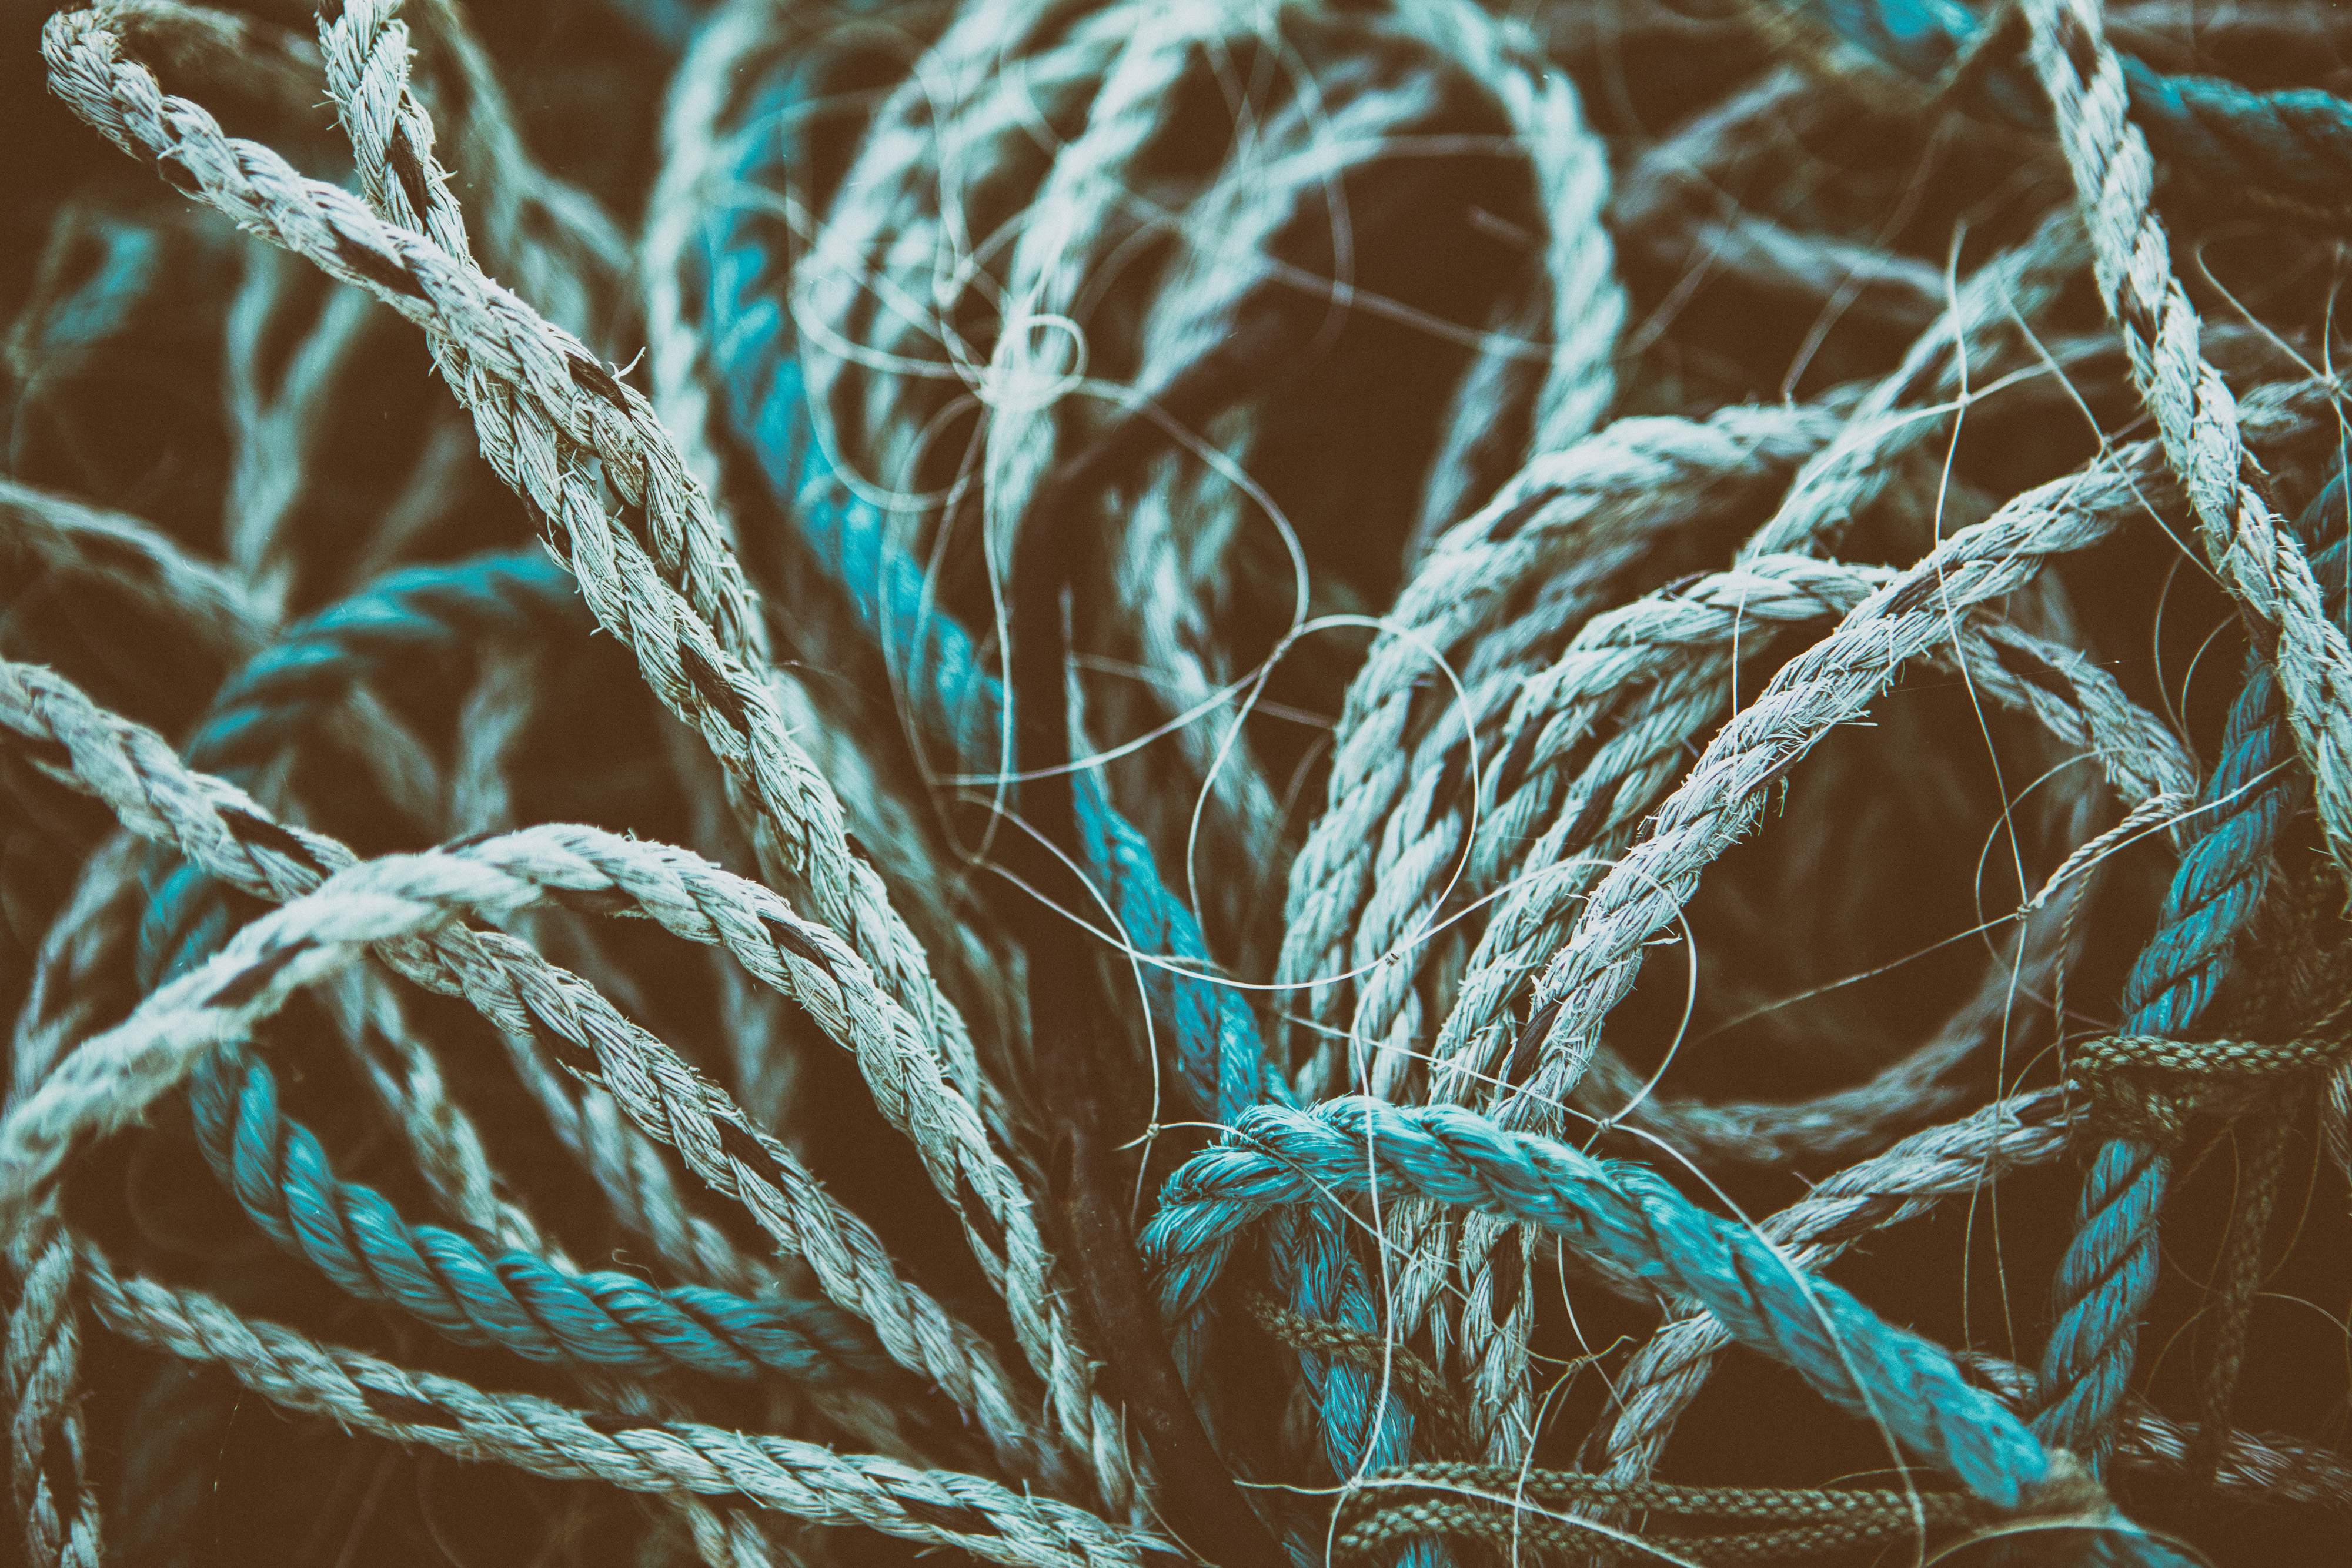 Free Images : rope, boat, pattern, sailing, rigging, yacht, blue